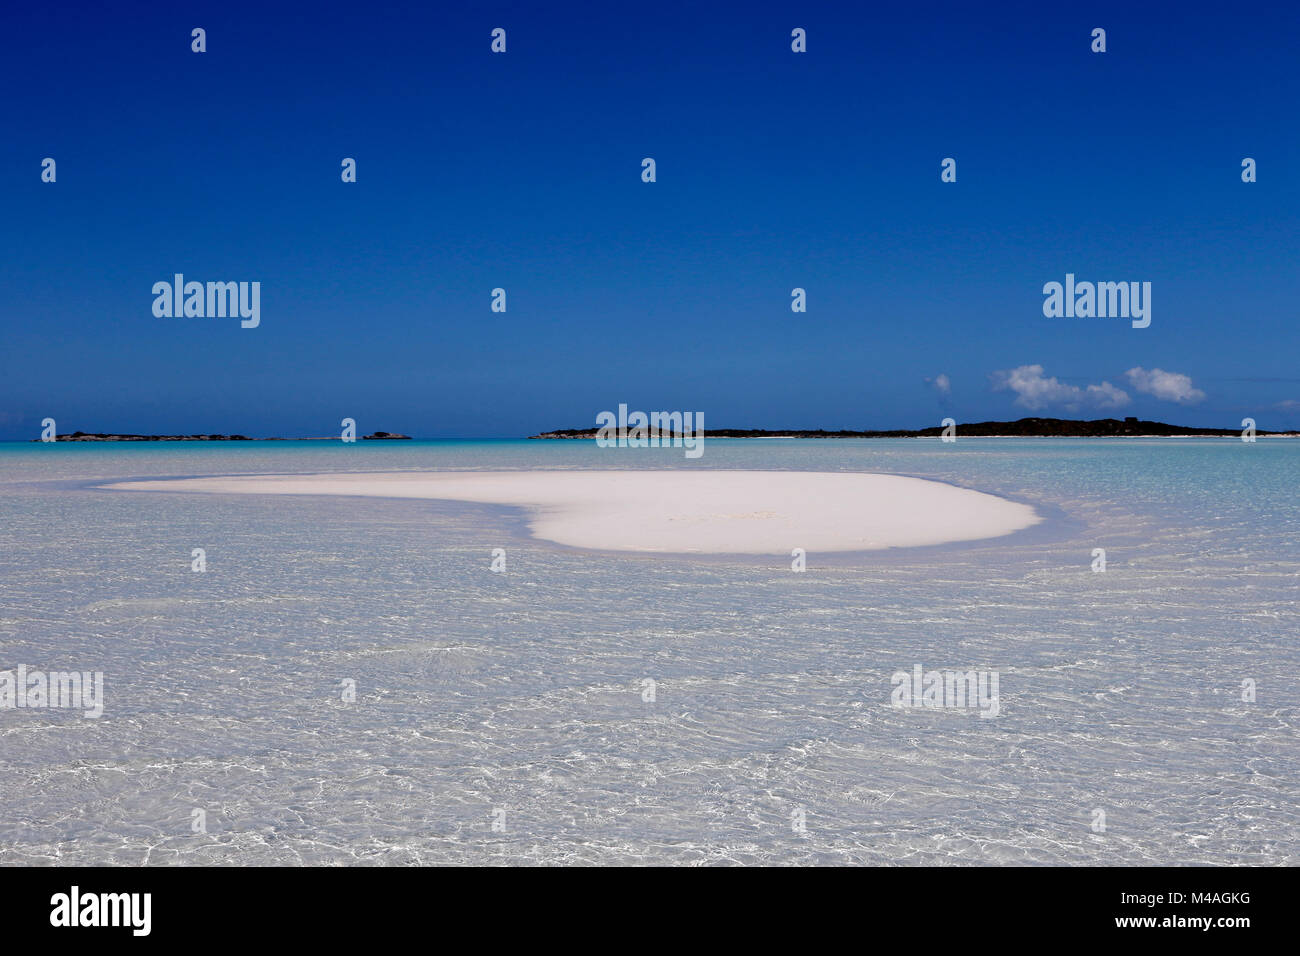 A small sand bar in the clear waters near Man-O-War Cay just off the island of Great Exuma in the Bahamas. Stock Photo